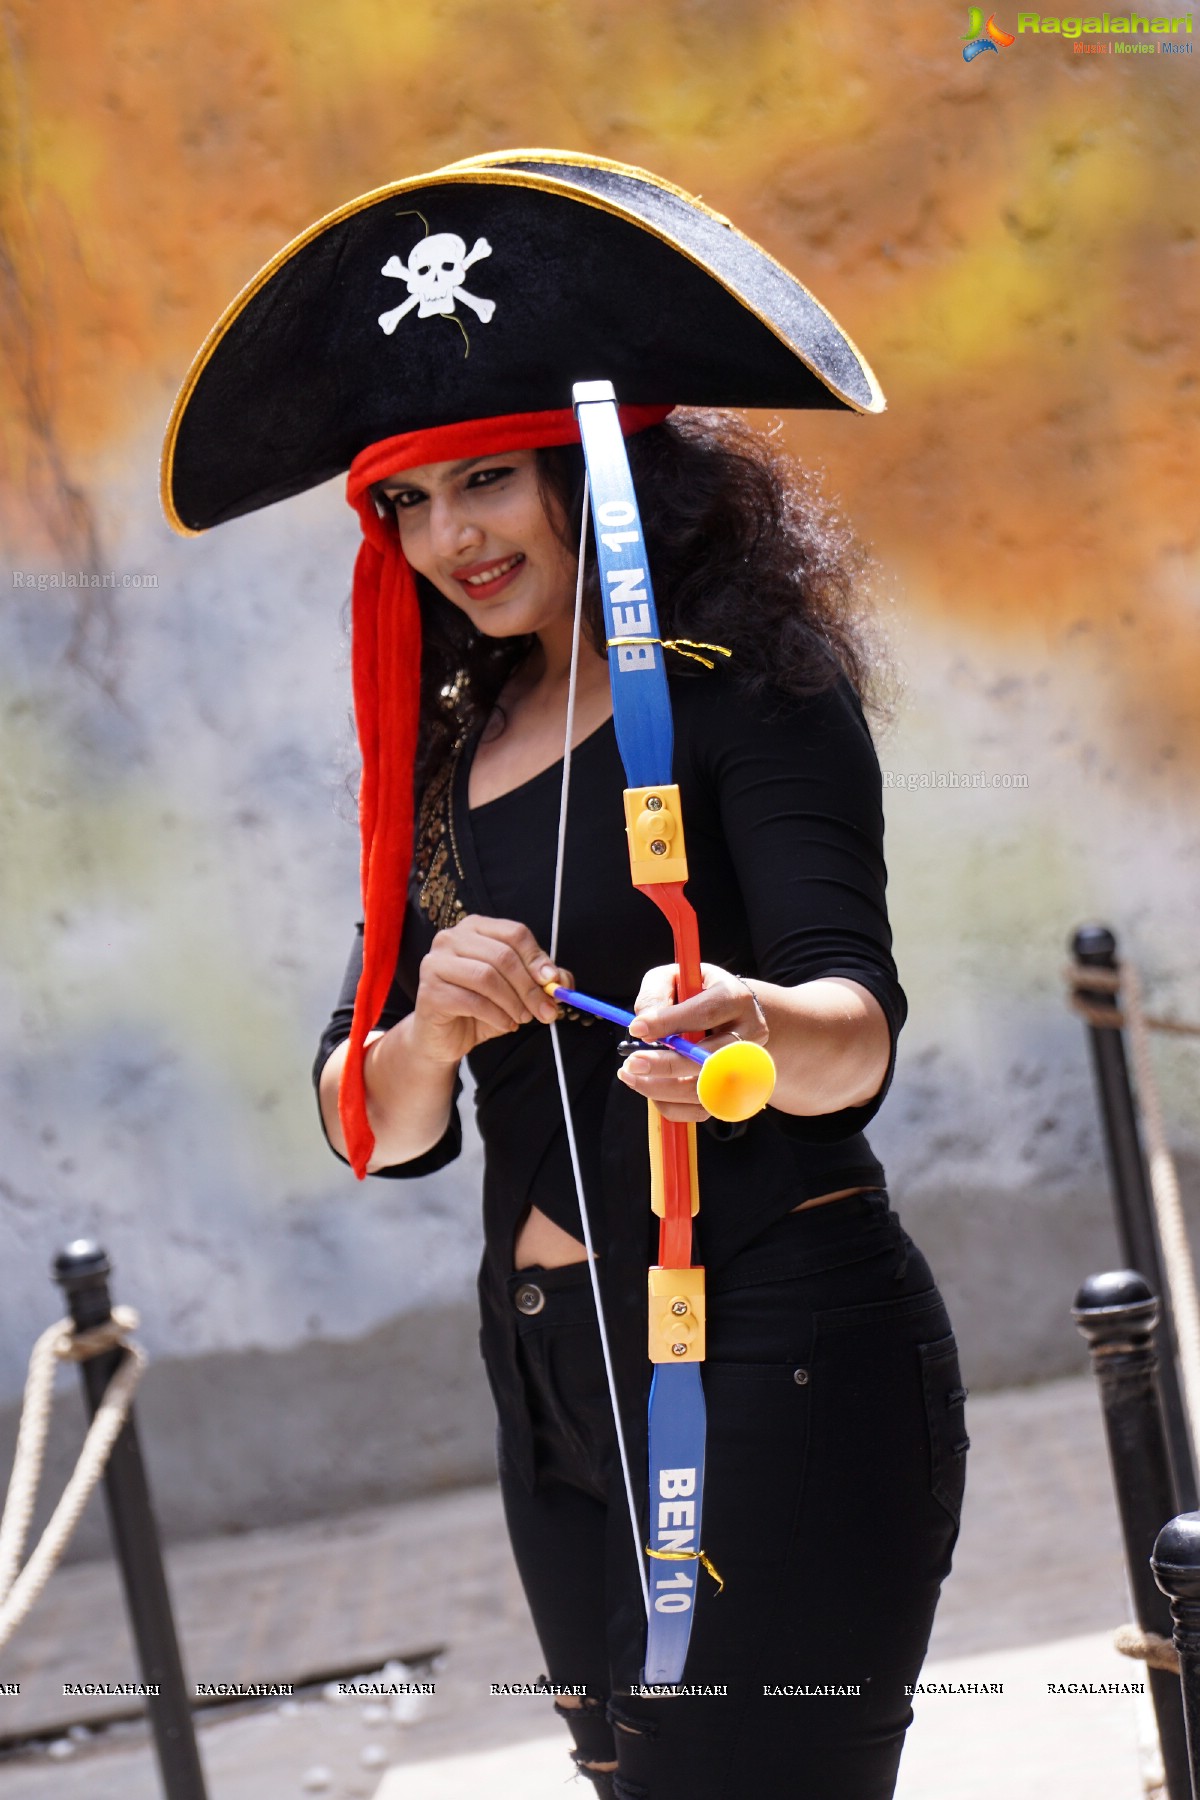 Final Destination - Halloween Theme Party by Phankaar Innovation Minds at The Pirate Brew, Hyderabad